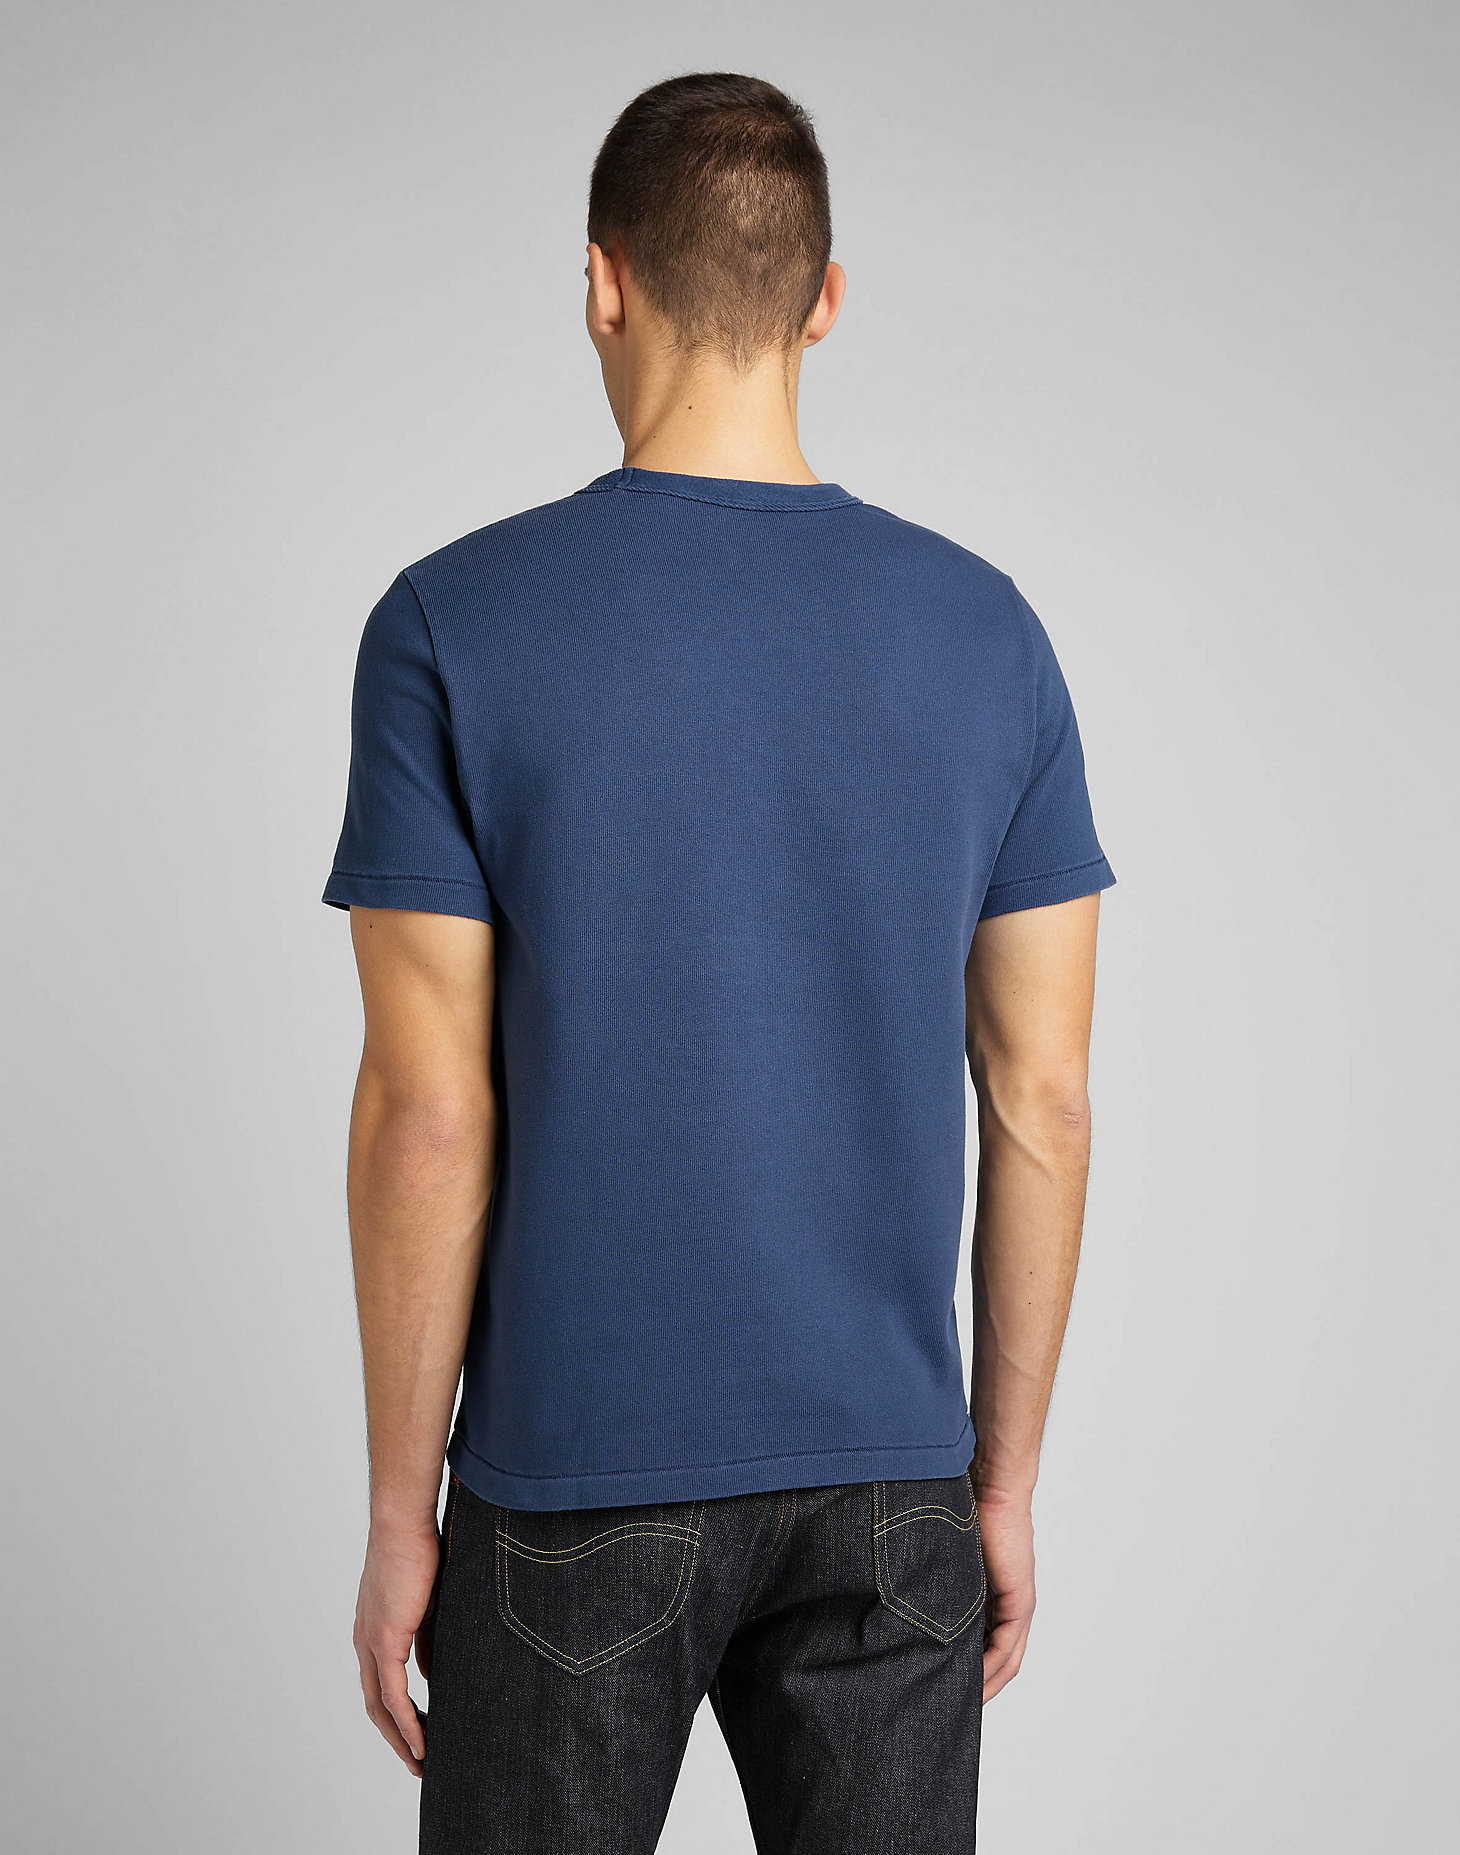 101 Core Tee in Thunder alternative view 1